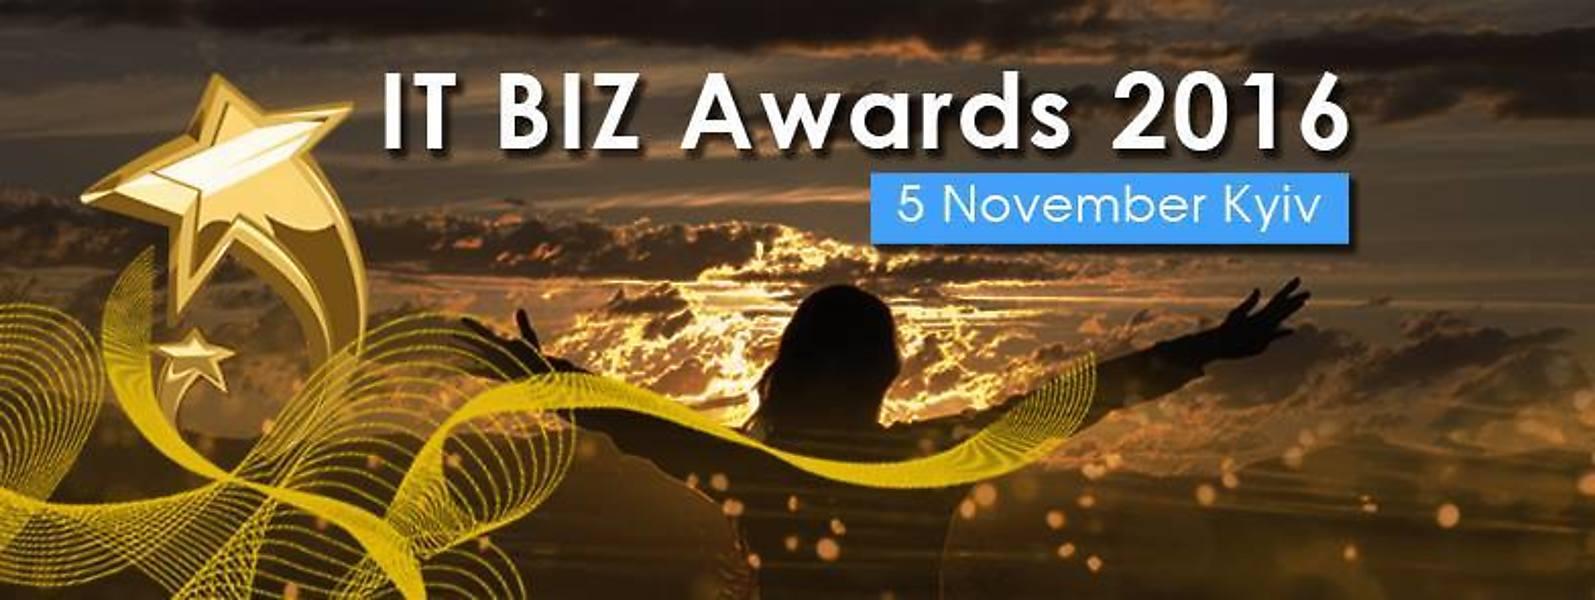 Agilie’s CEO Sergey Gladun Is Among the Three Finalists for the CEO of the Year at IT Biz Awards 2016